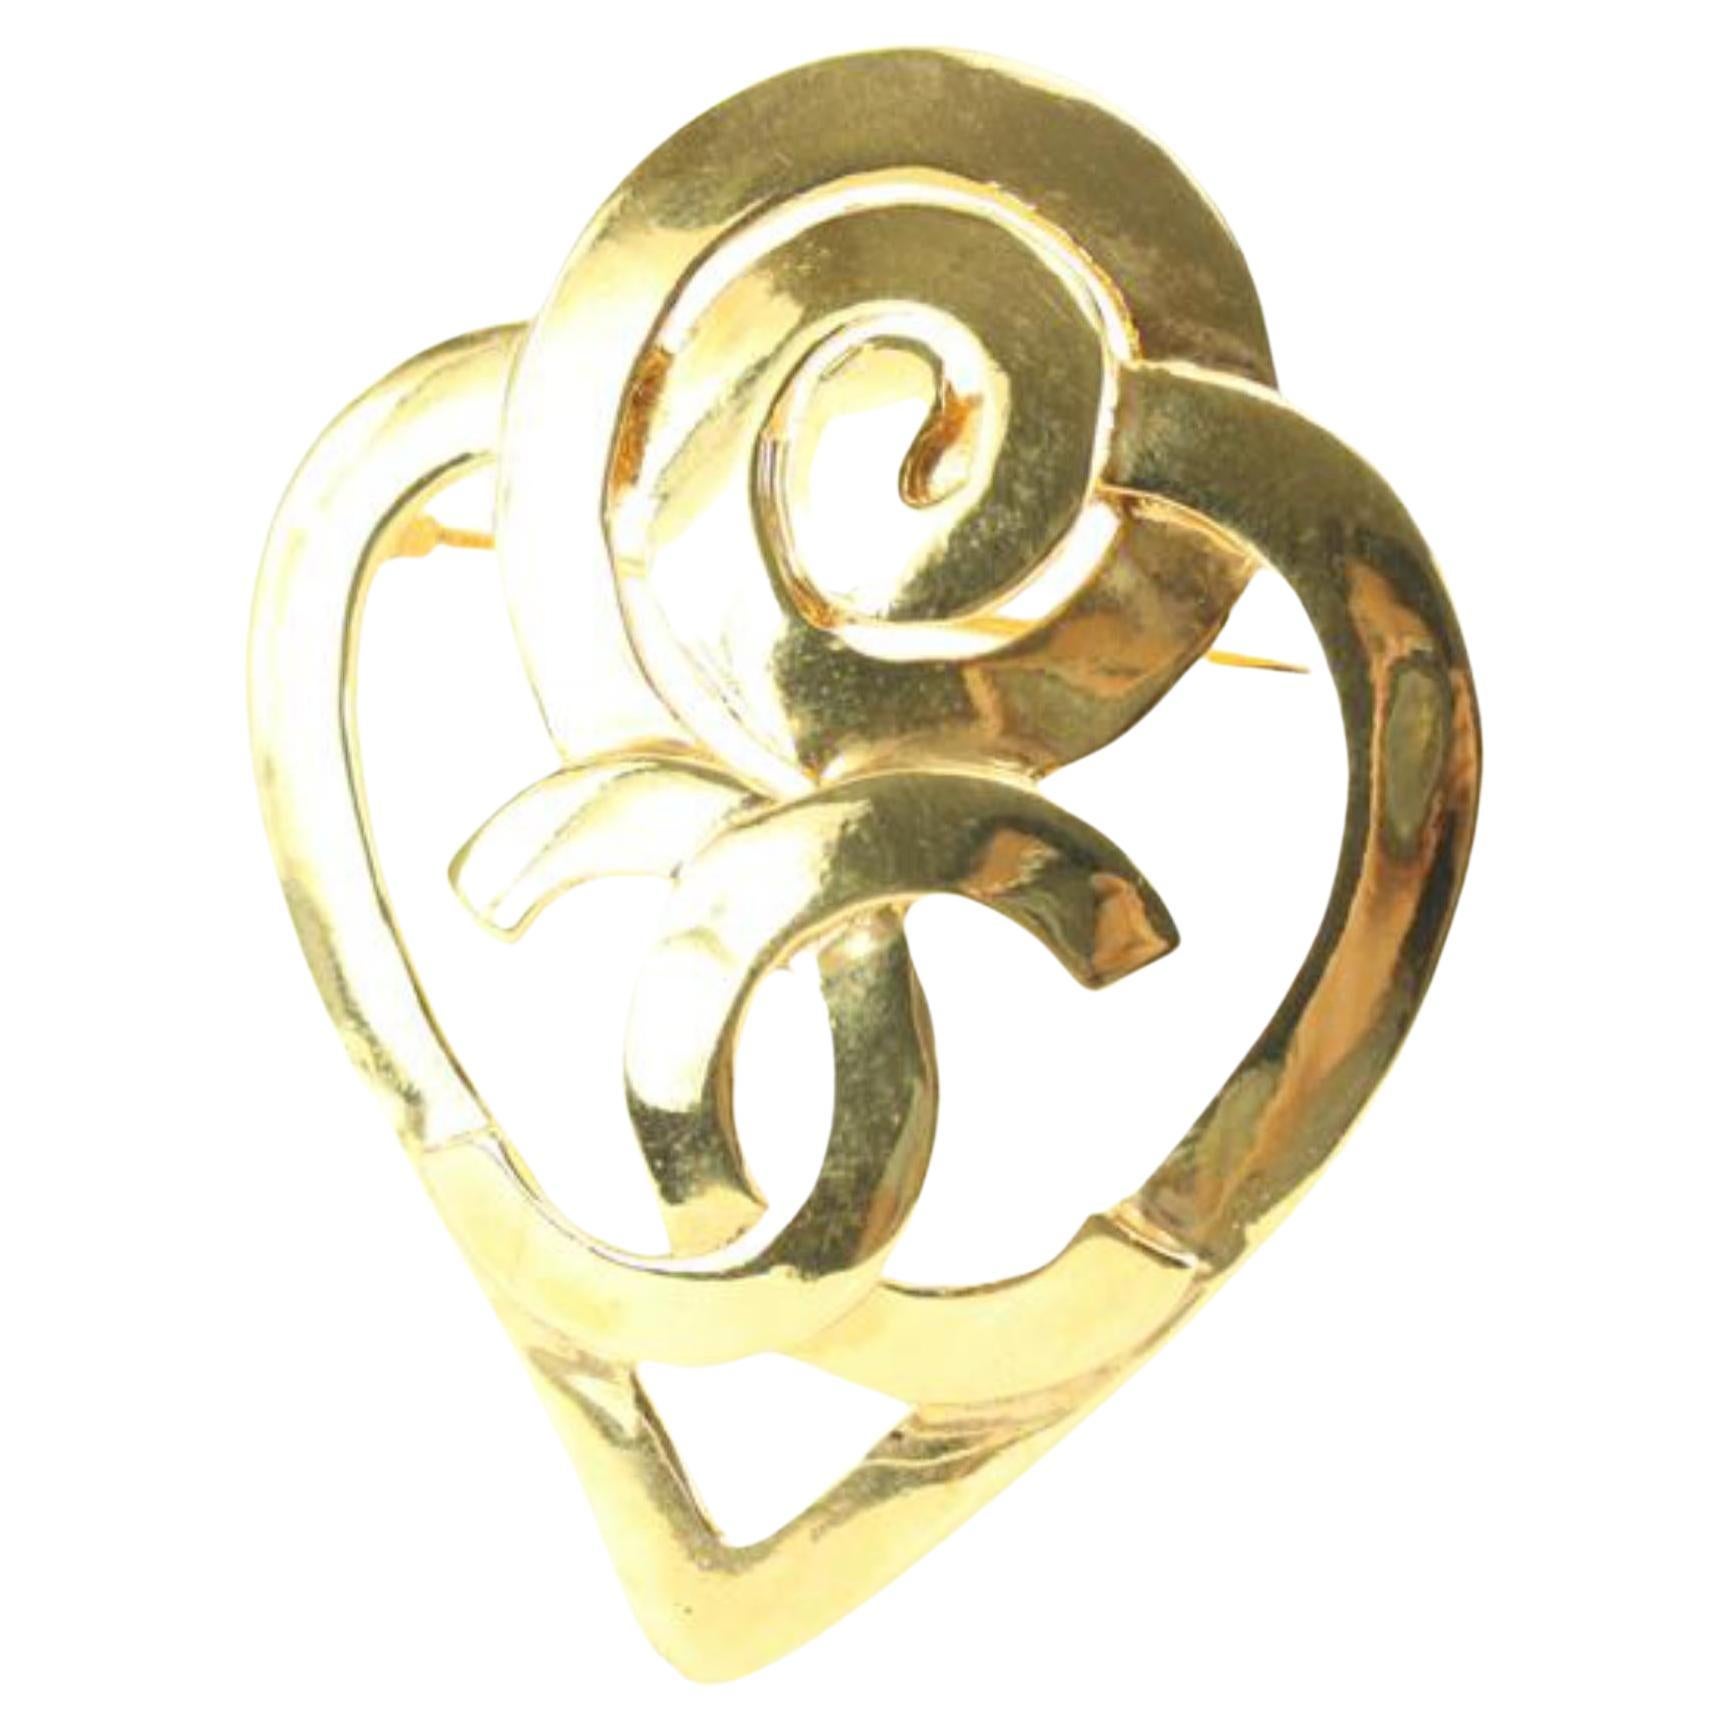 Chanel 95p Spiral Heart CC Brooch Pin Corsage 29ck824s For Sale